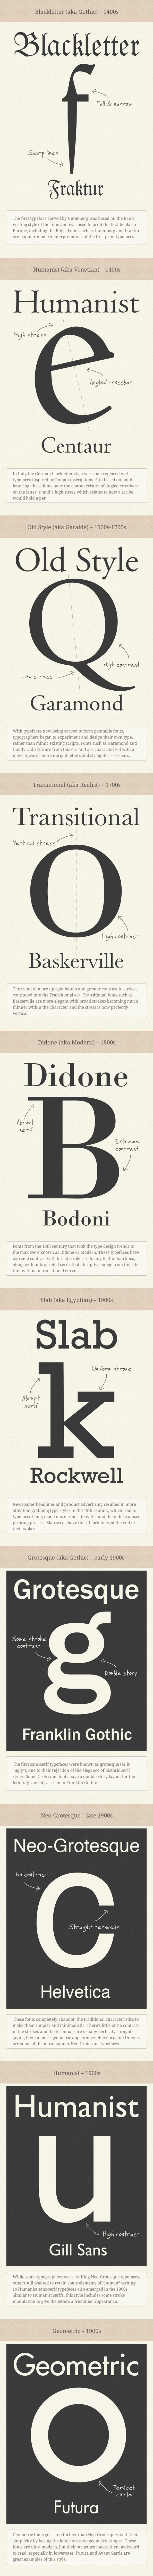 history-of-typefaces